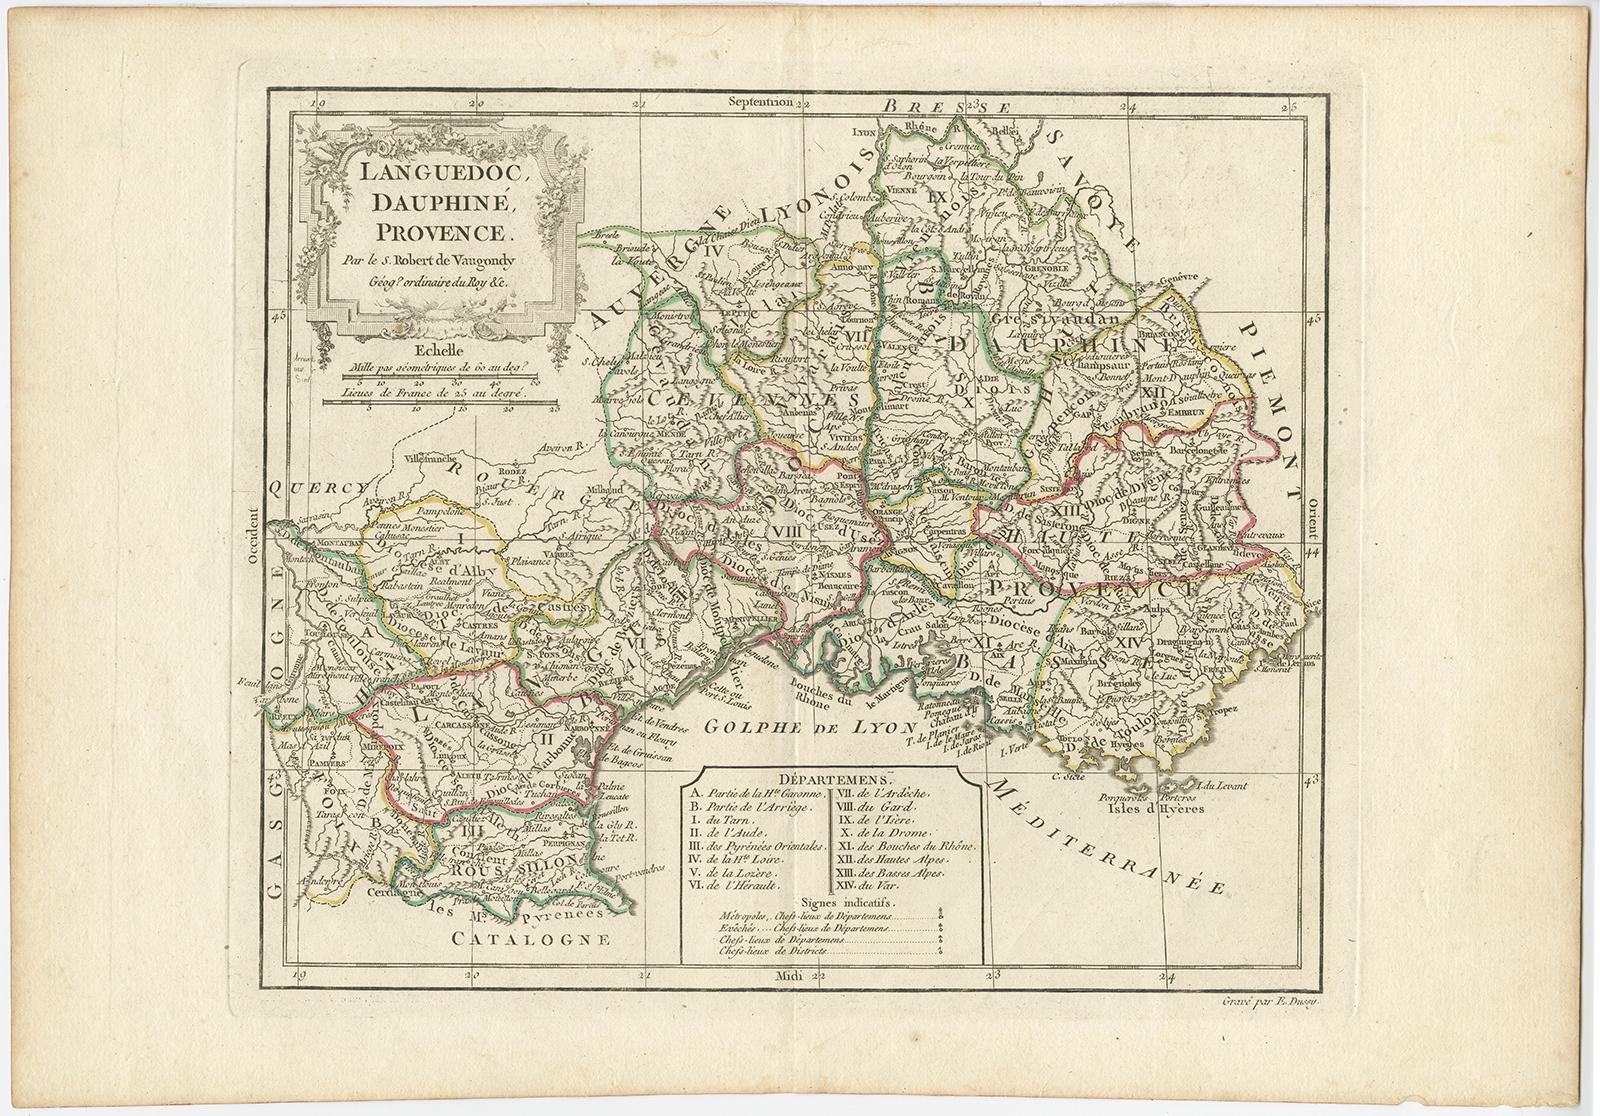 Antique map titled 'Languedoc, Dauphiné, Province'. 

Beautiful antique map of Southeastern France with decorative cartouche. Map includes topographical detail as well as a reference to the departments at the time of publication.

Artists and